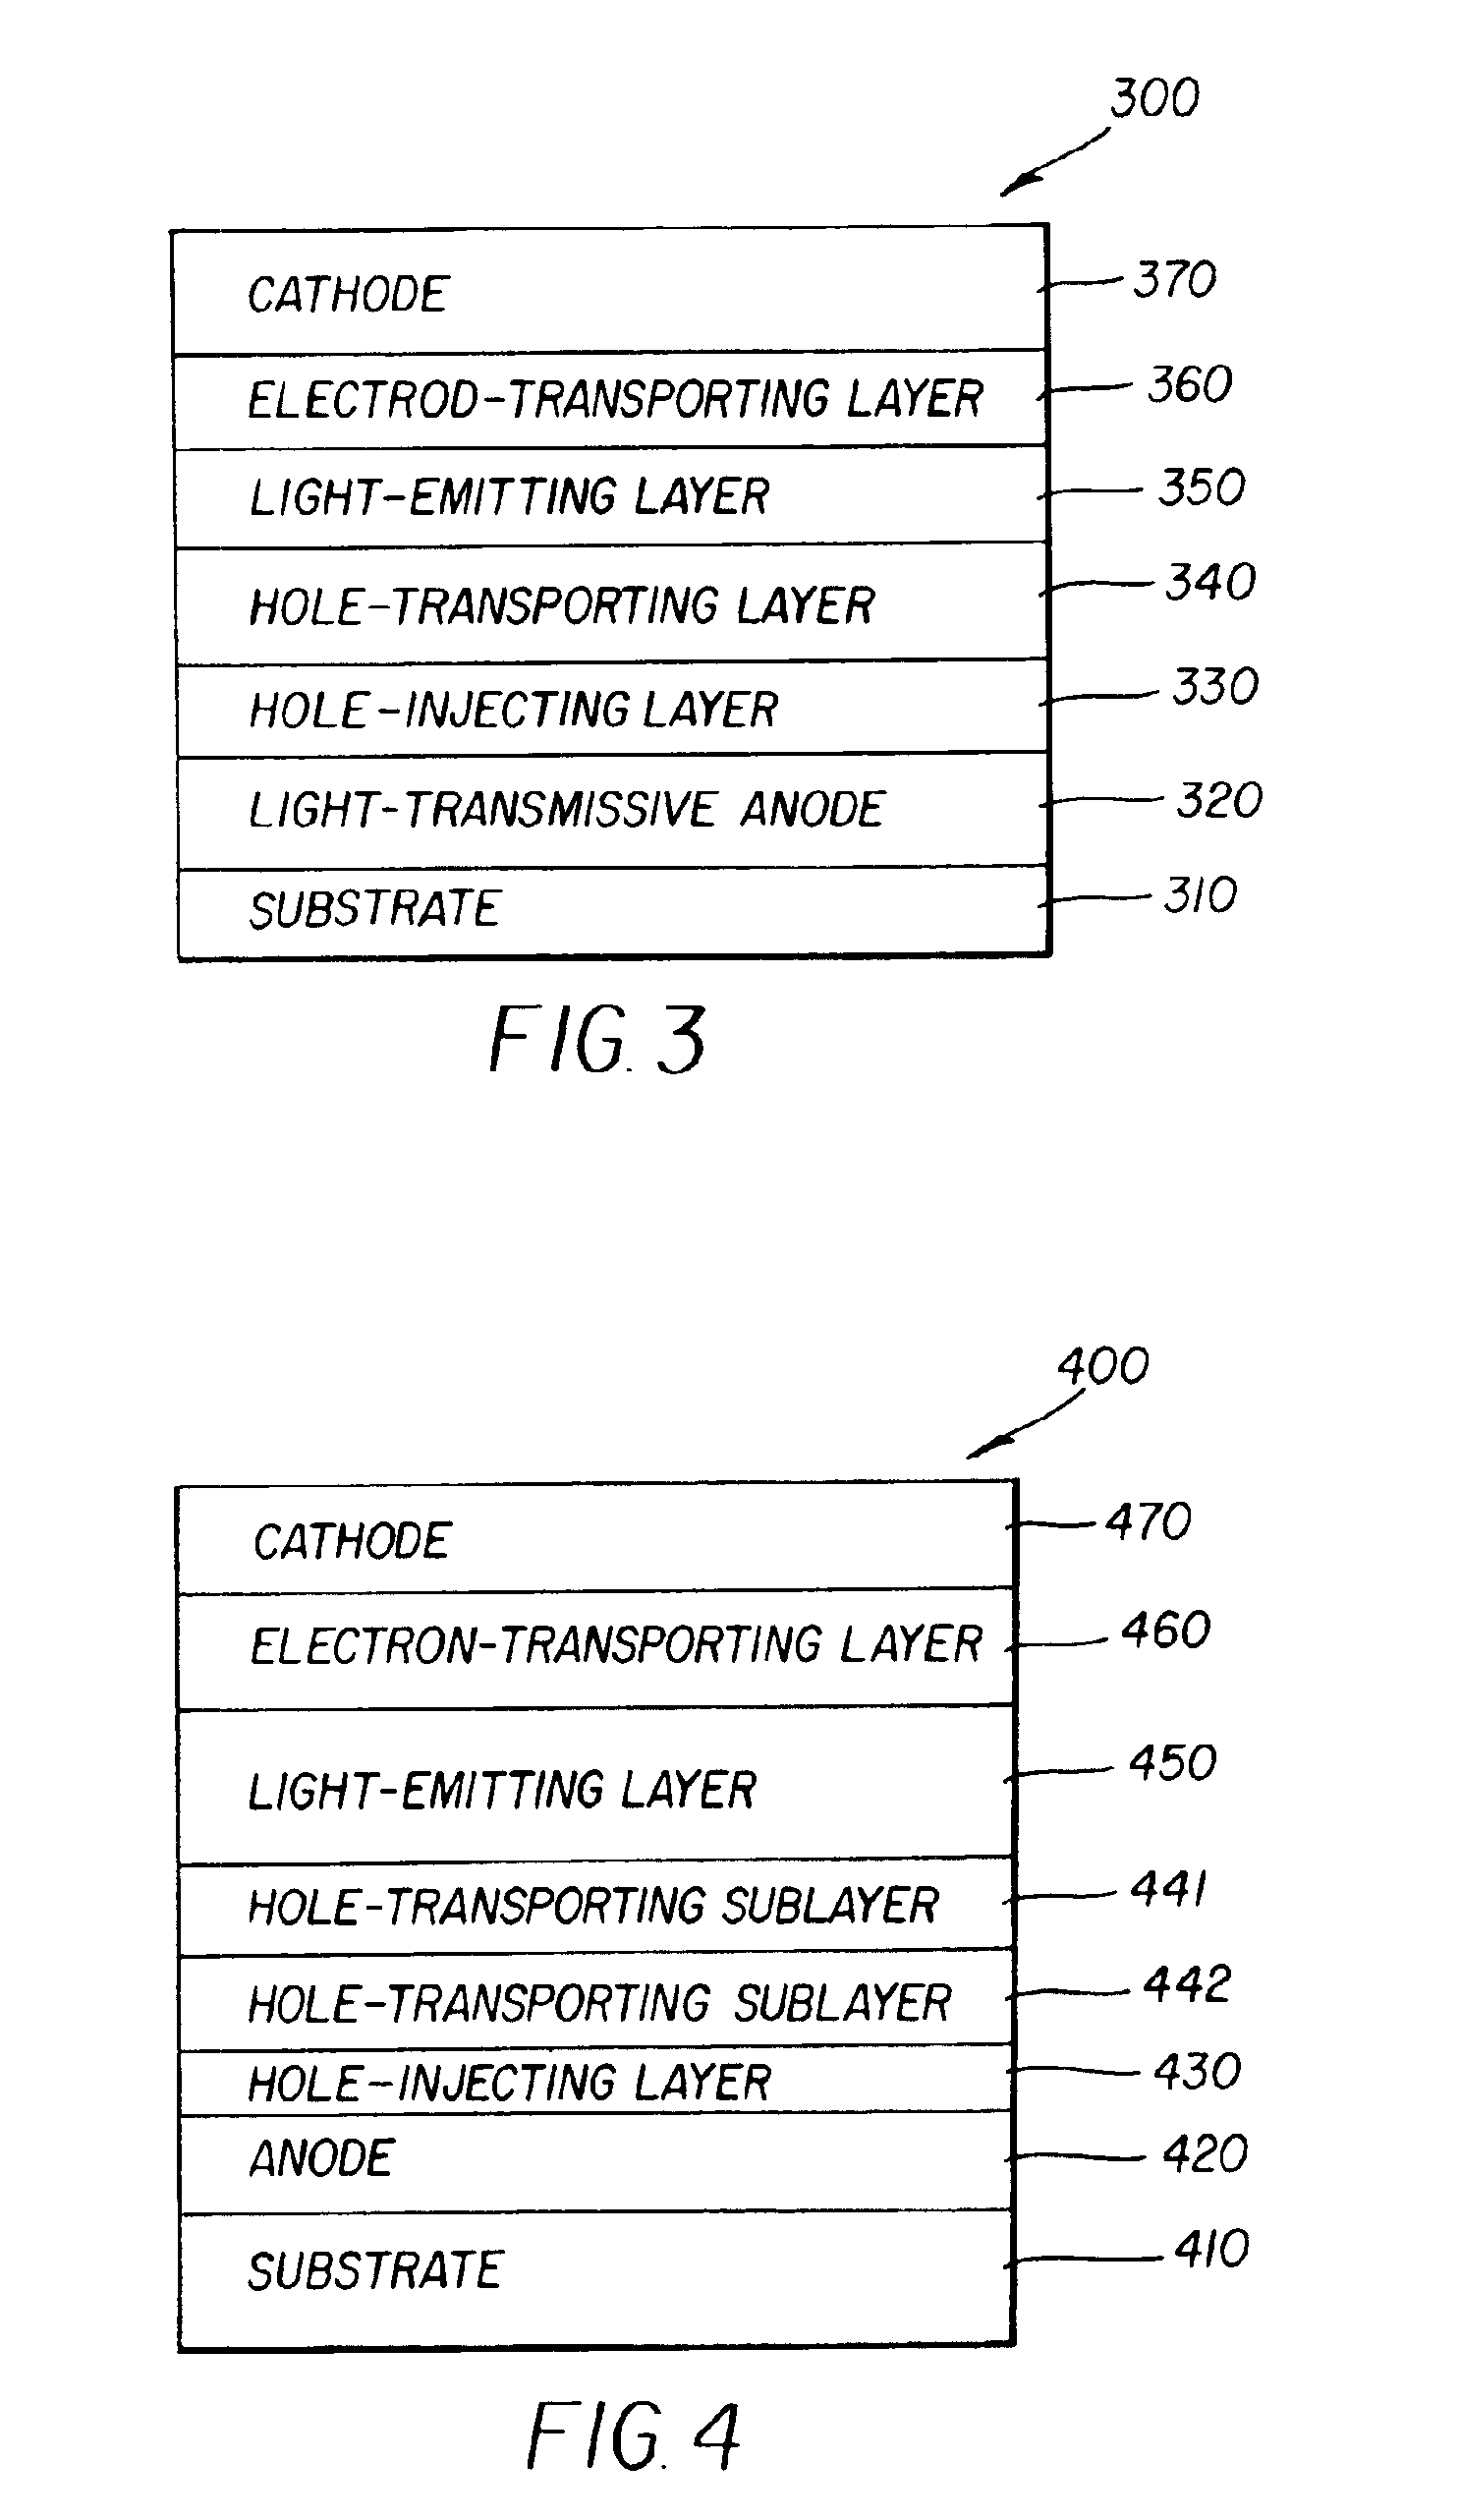 White light-emitting OLED device having a blue light-emitting layer doped with an electron-transporting or a hole-transporting material or both